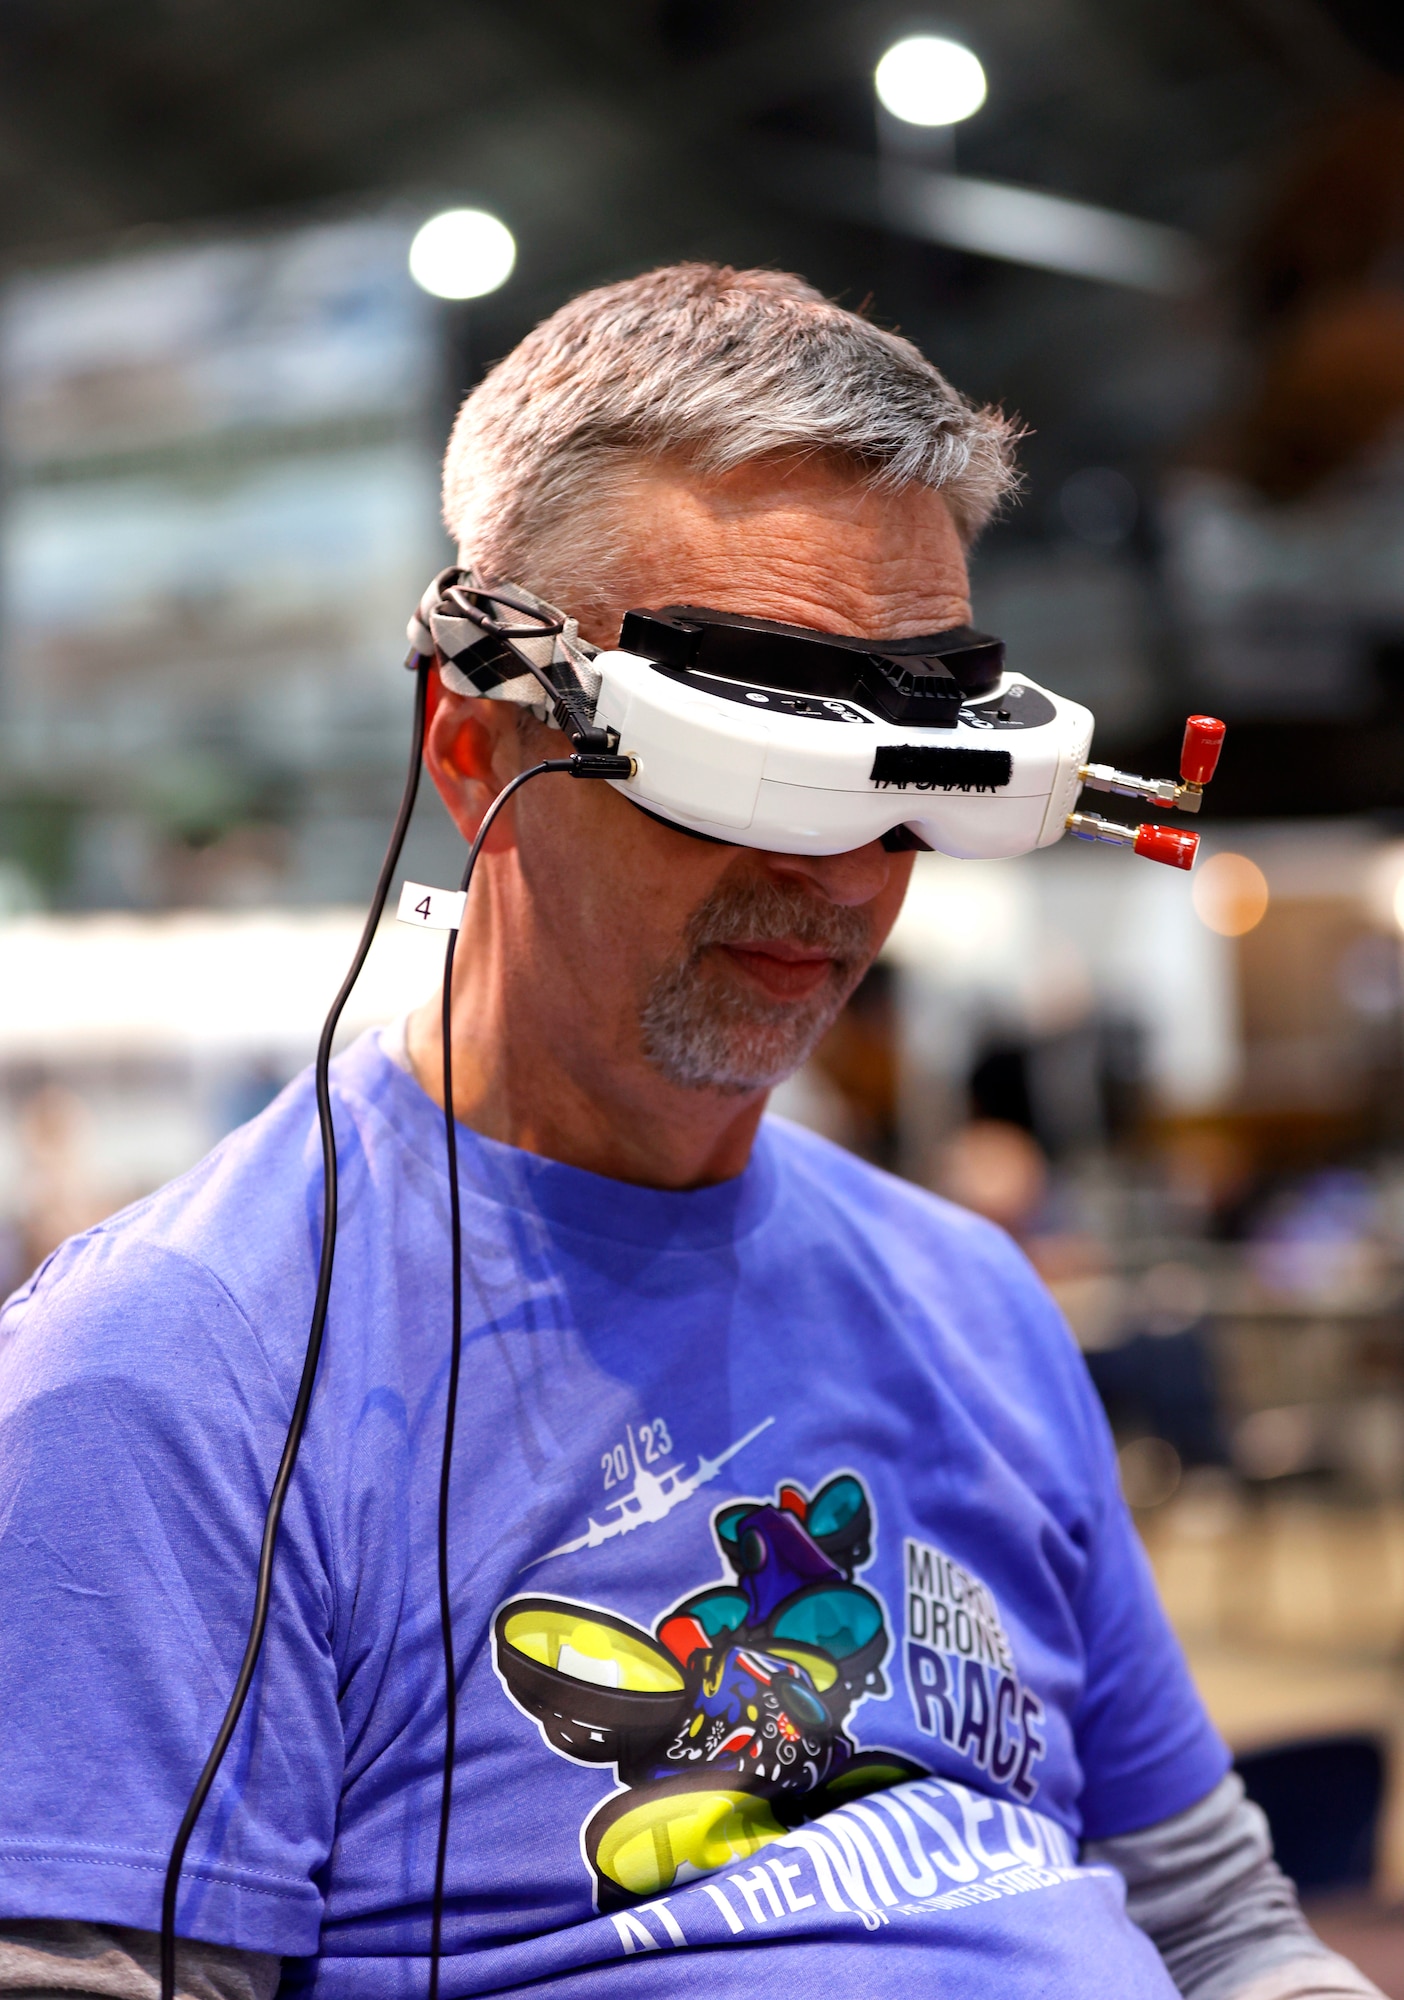 Image of a man in a purple t-shirt with short grey hair wearing a drone headset.